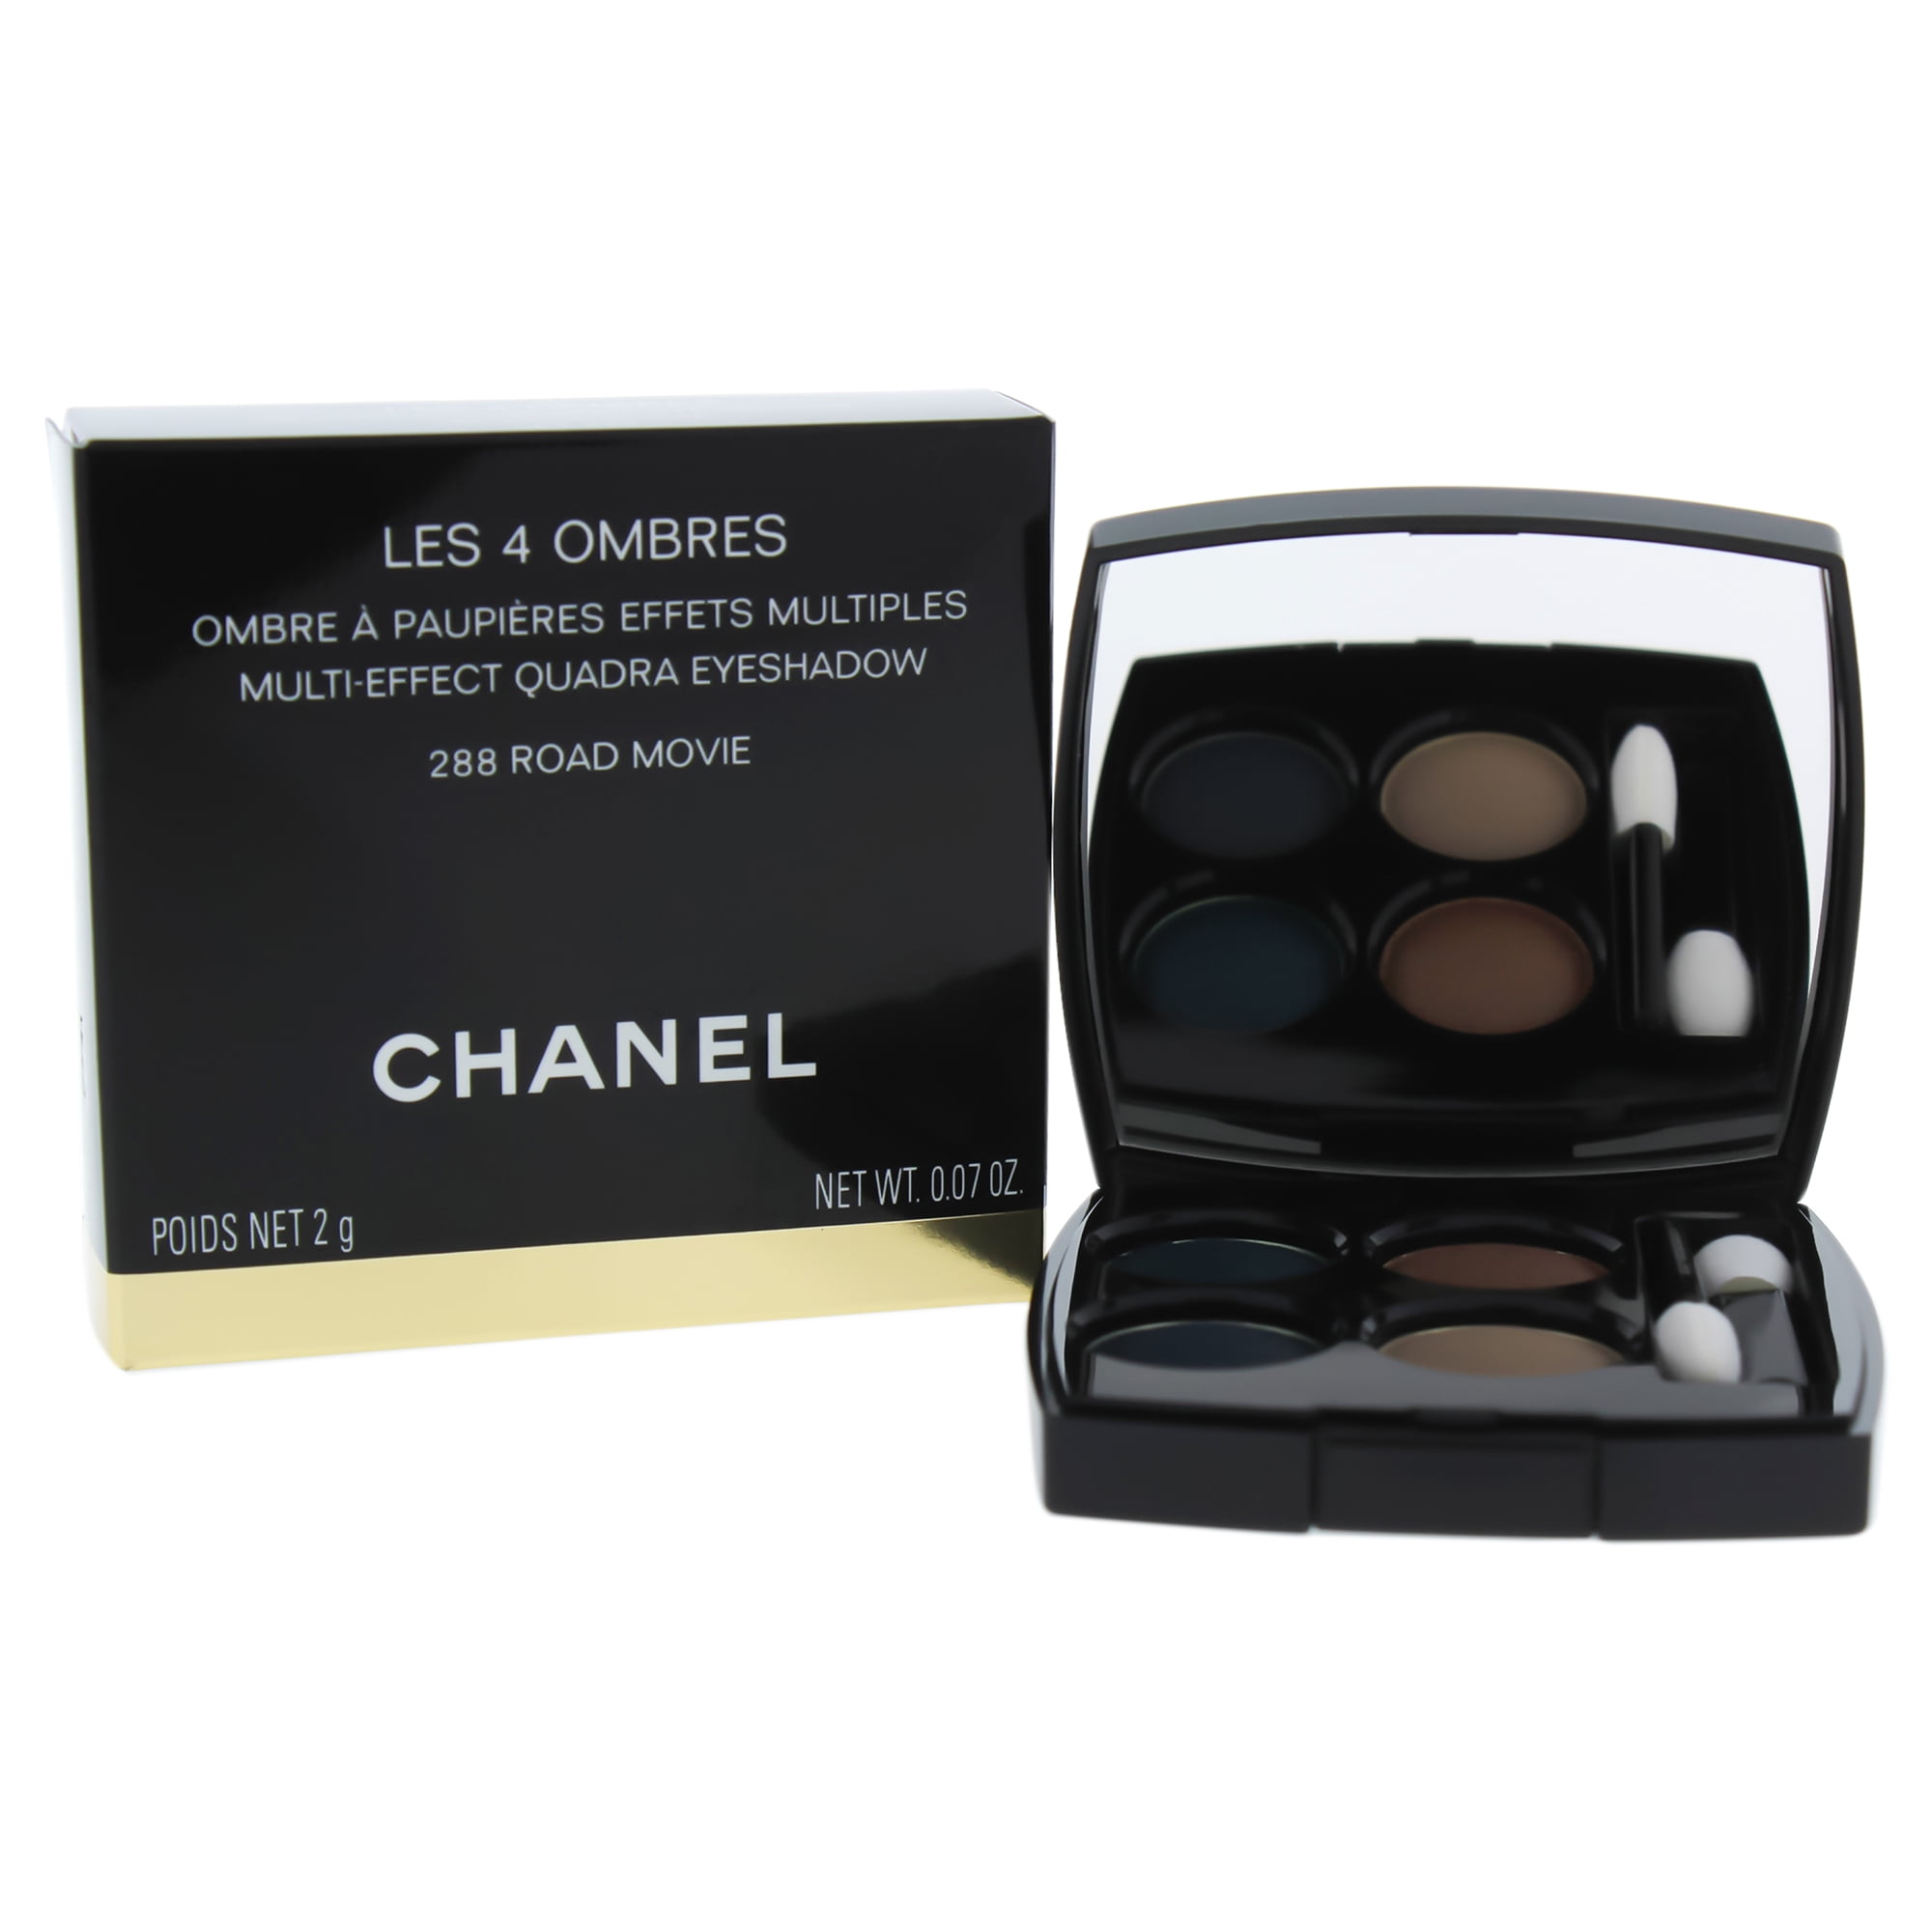 Les 4 Ombres Multi-Effect Quadra Eyeshadow - 288 Road Movie by Chanel ...